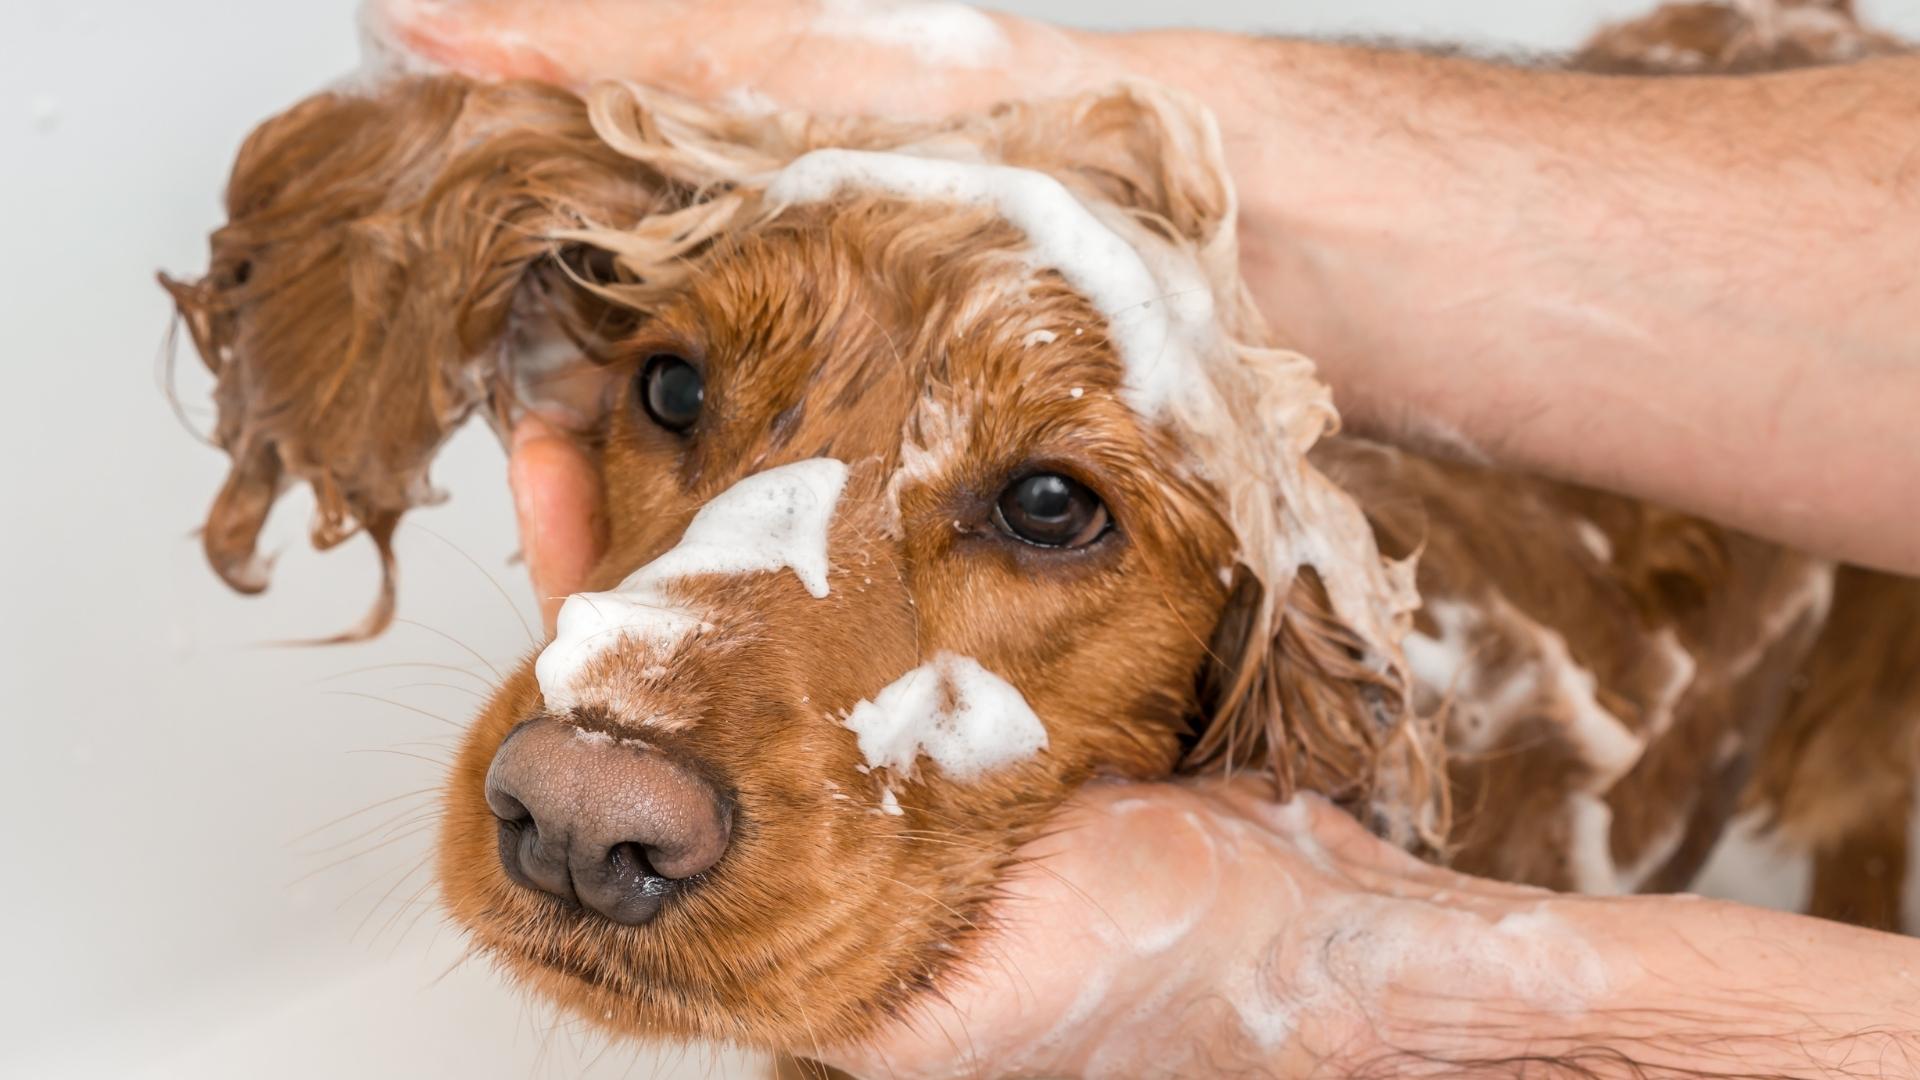 Dog being washed with shampoo